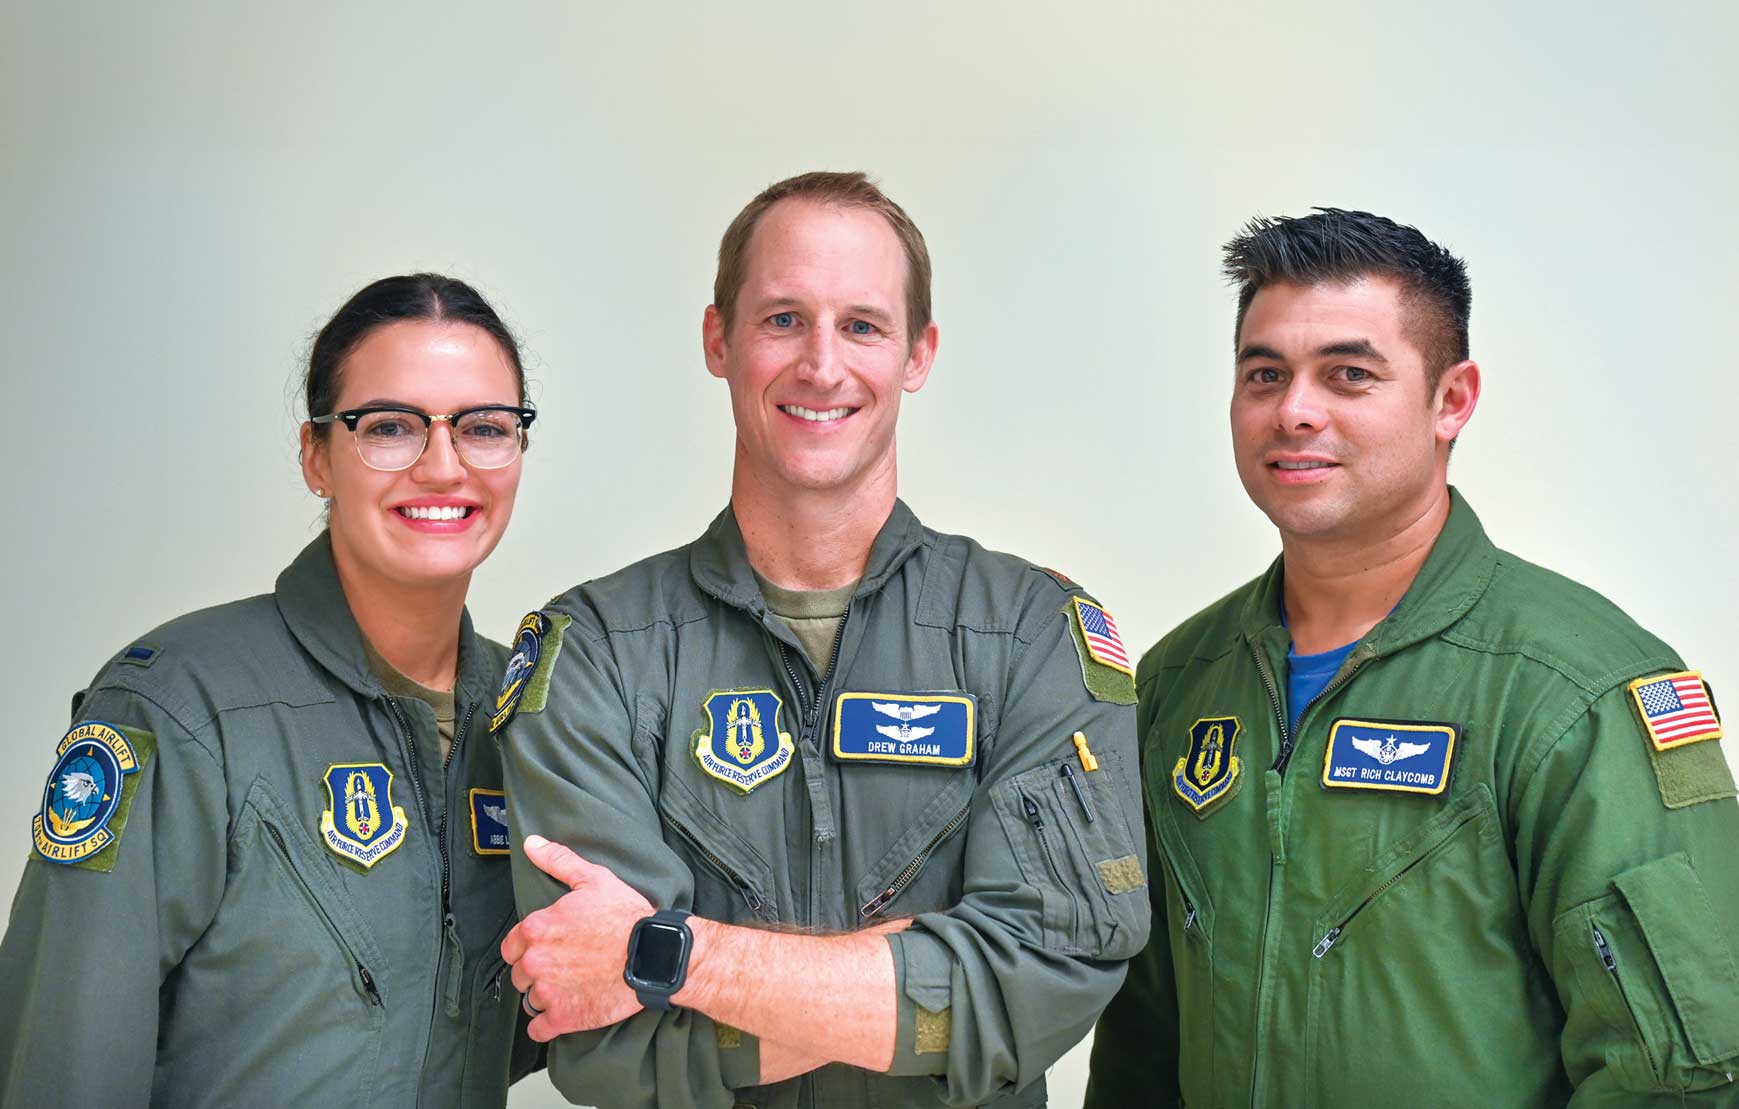 Three people in military uniforms posing for a picture.